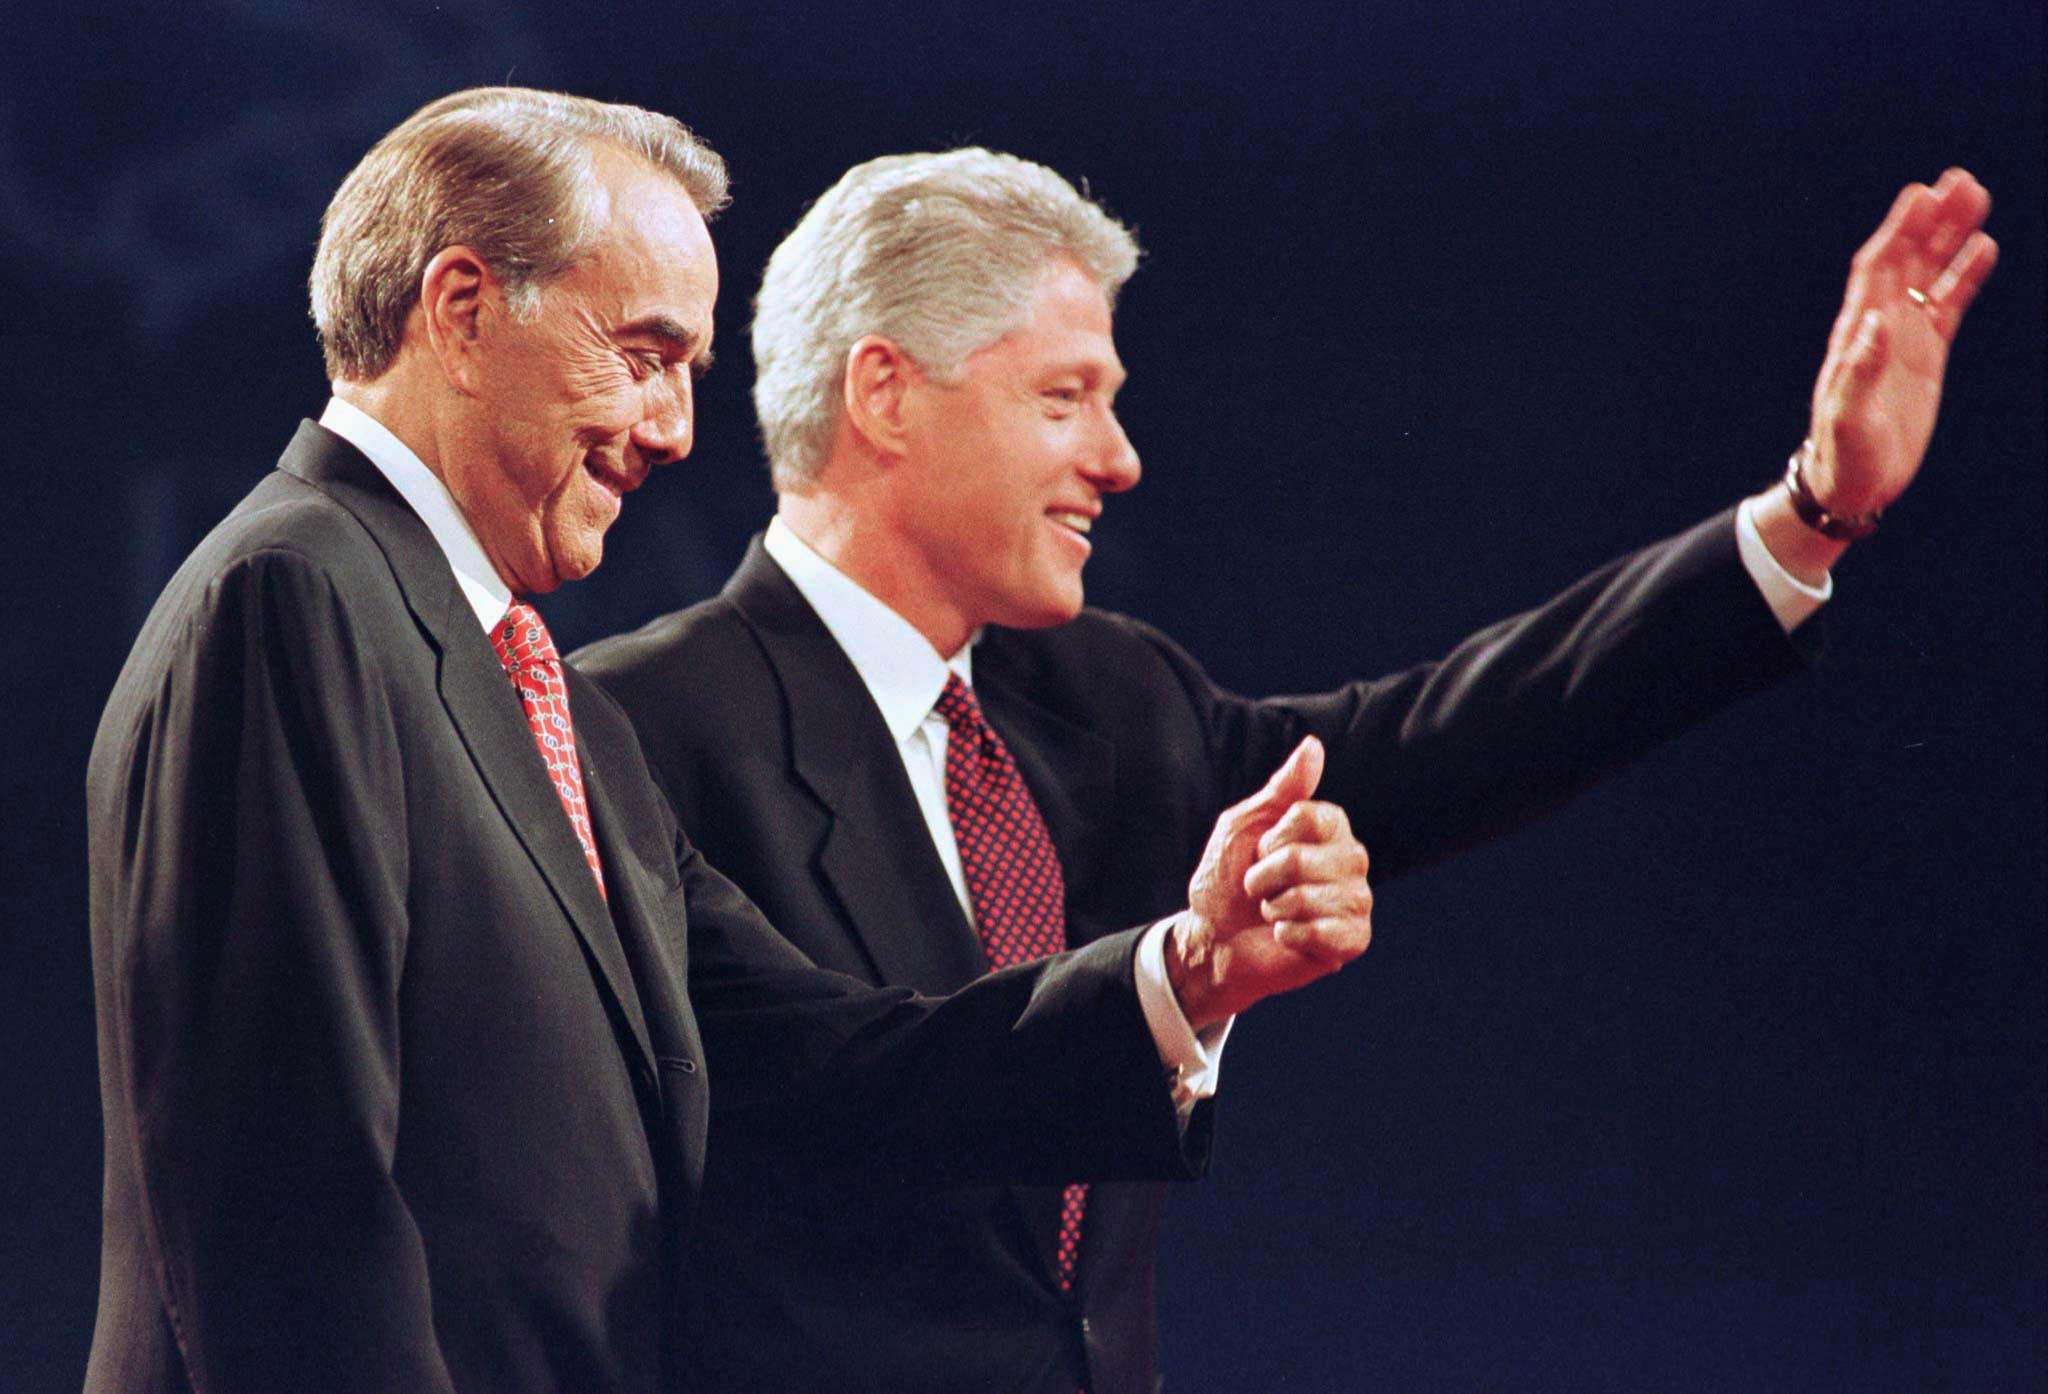 Republican presidential nominee Bob Dole (L) gives a thumb up as President Bill Clinton waves to the audience following the first presidential debate in Hartford, Connecticut, Oct. 6, 1997. REUTERS/File Photo